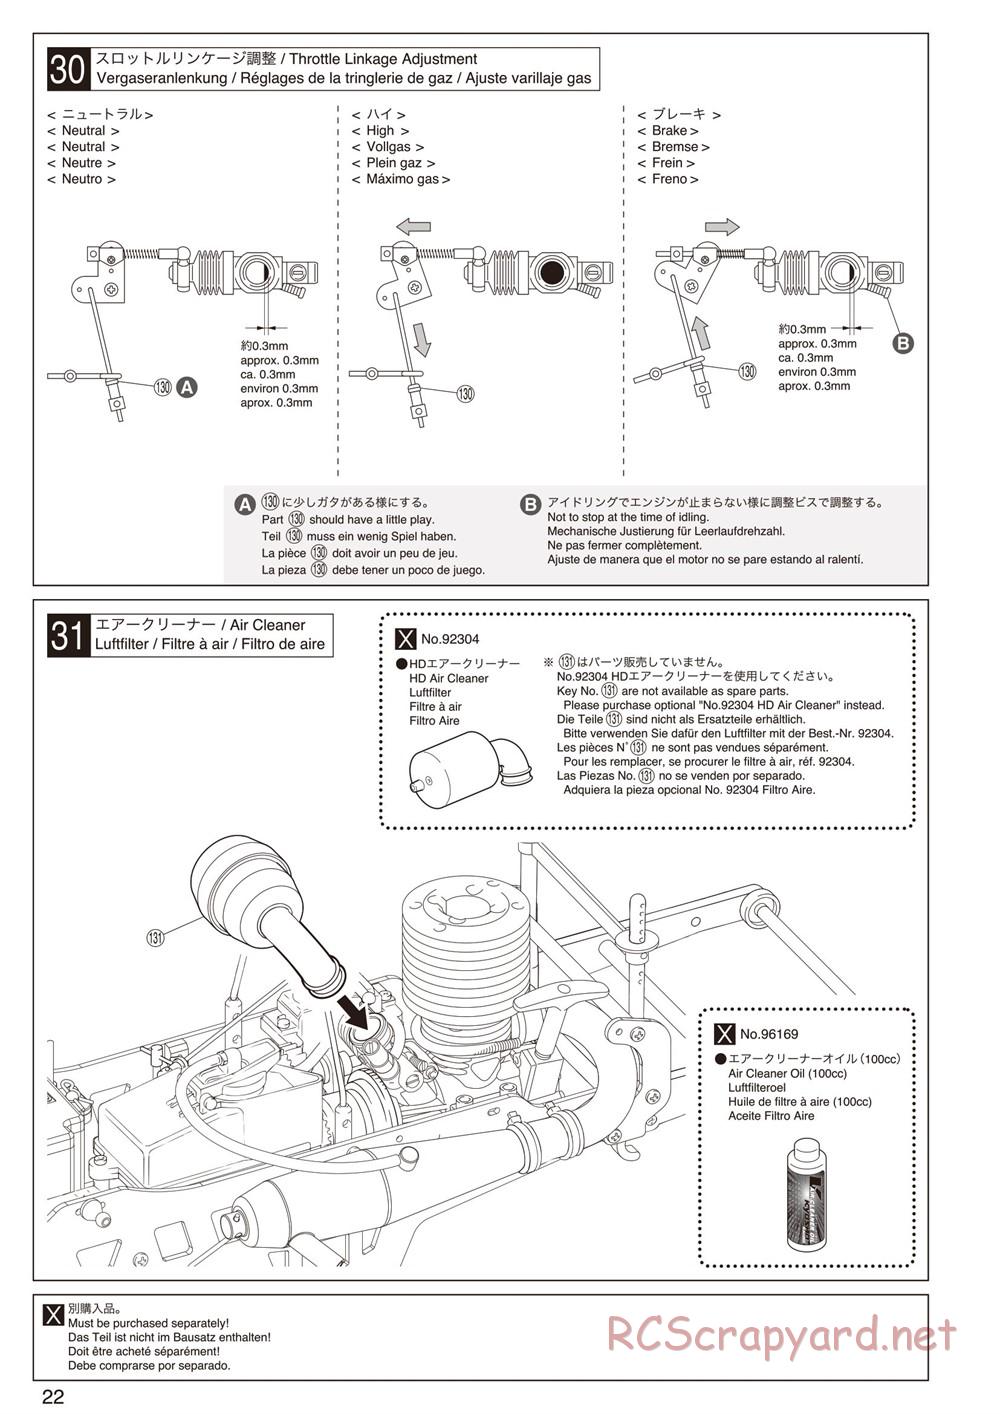 Kyosho - Mad Force Kruiser 2.0 - Manual - Page 22